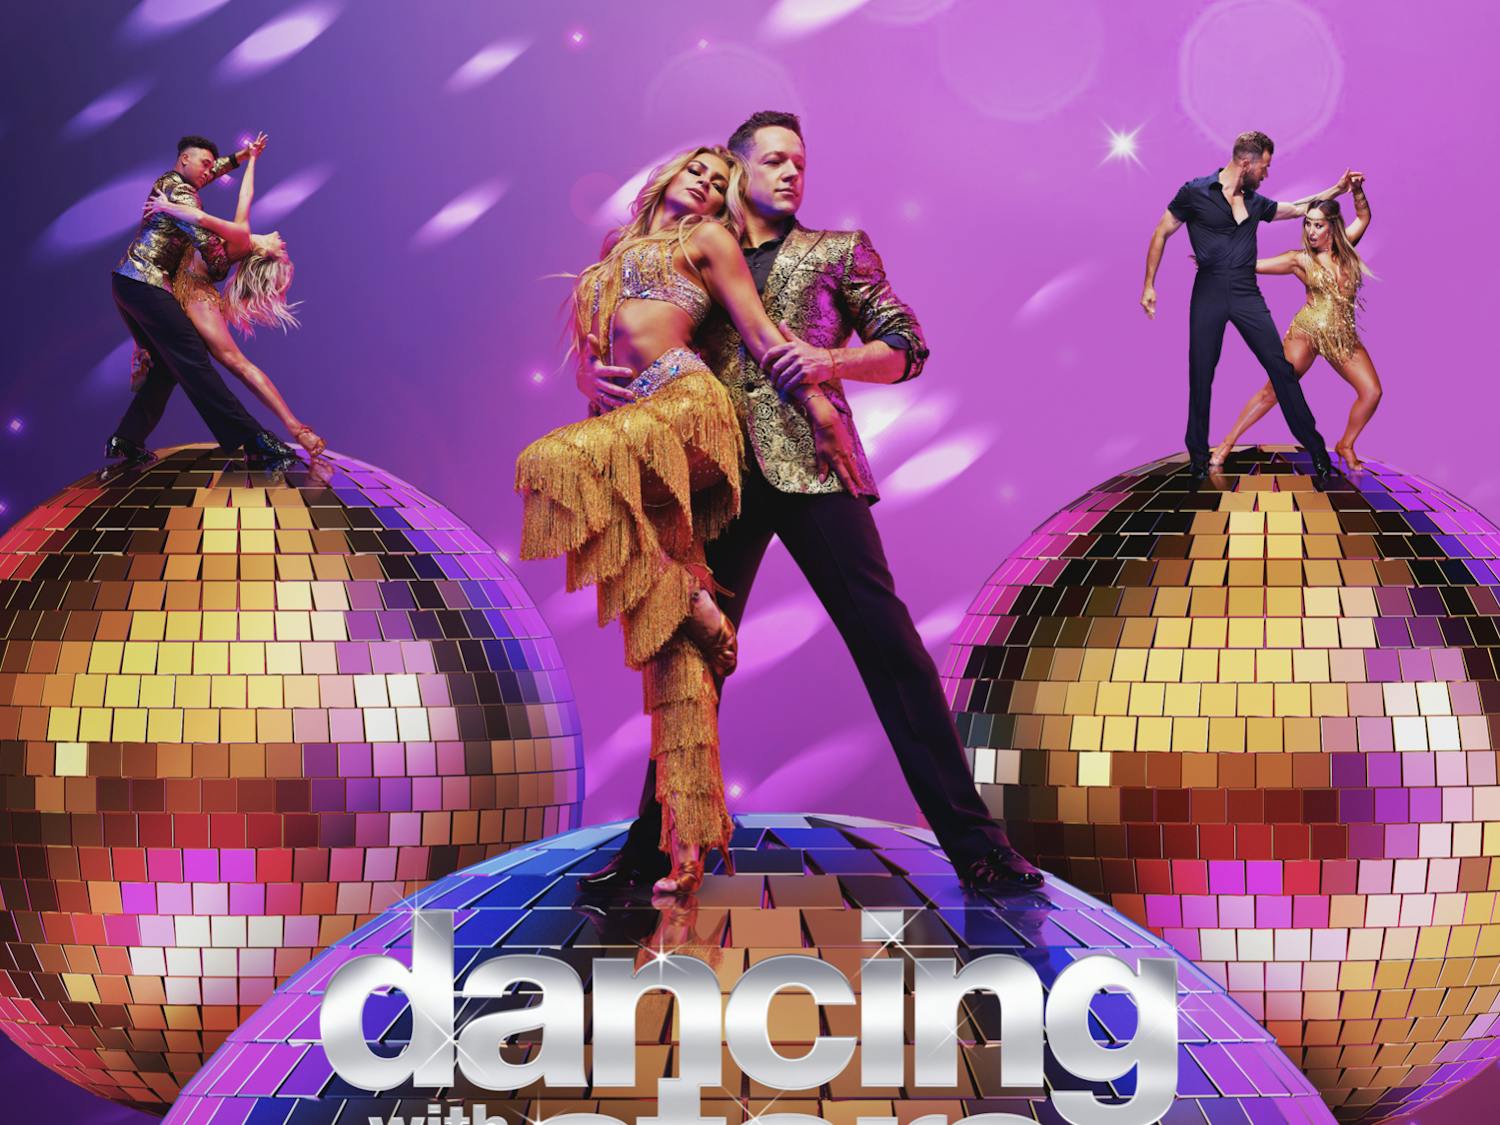 ‘Dancing With The Stars’ Season 31 enters its fourth week